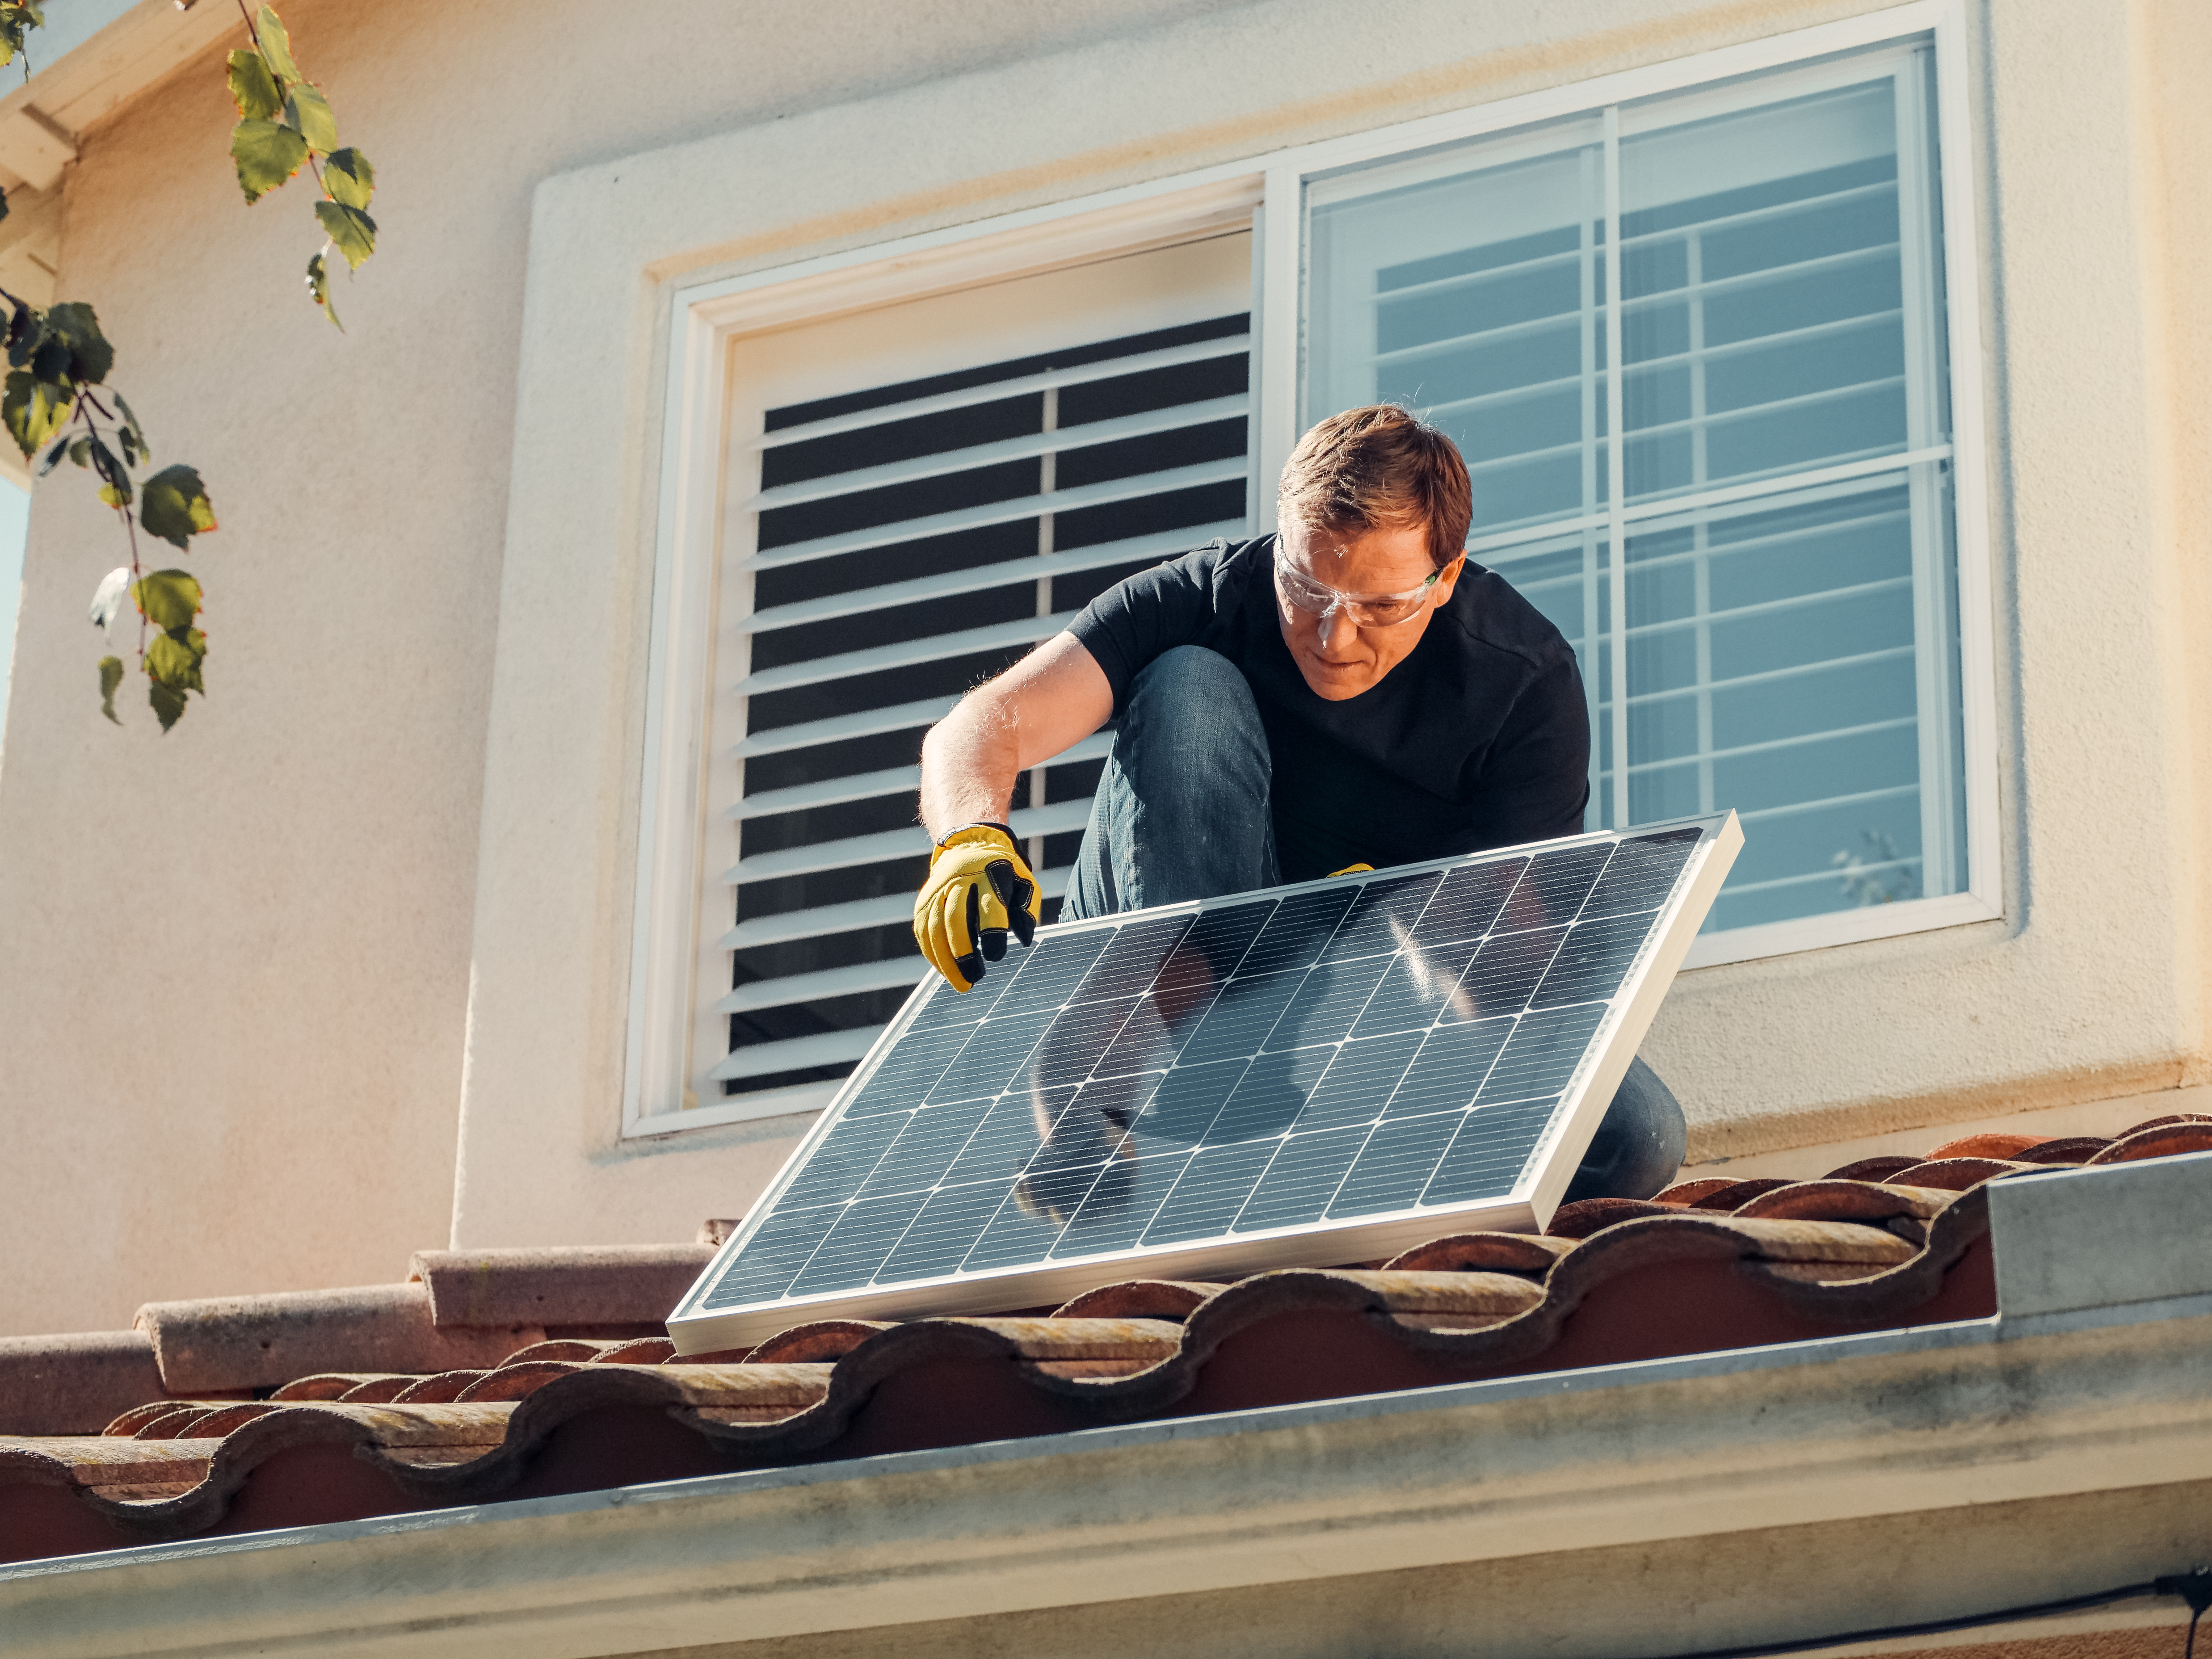 Man with gloves holding solar panels on the roof